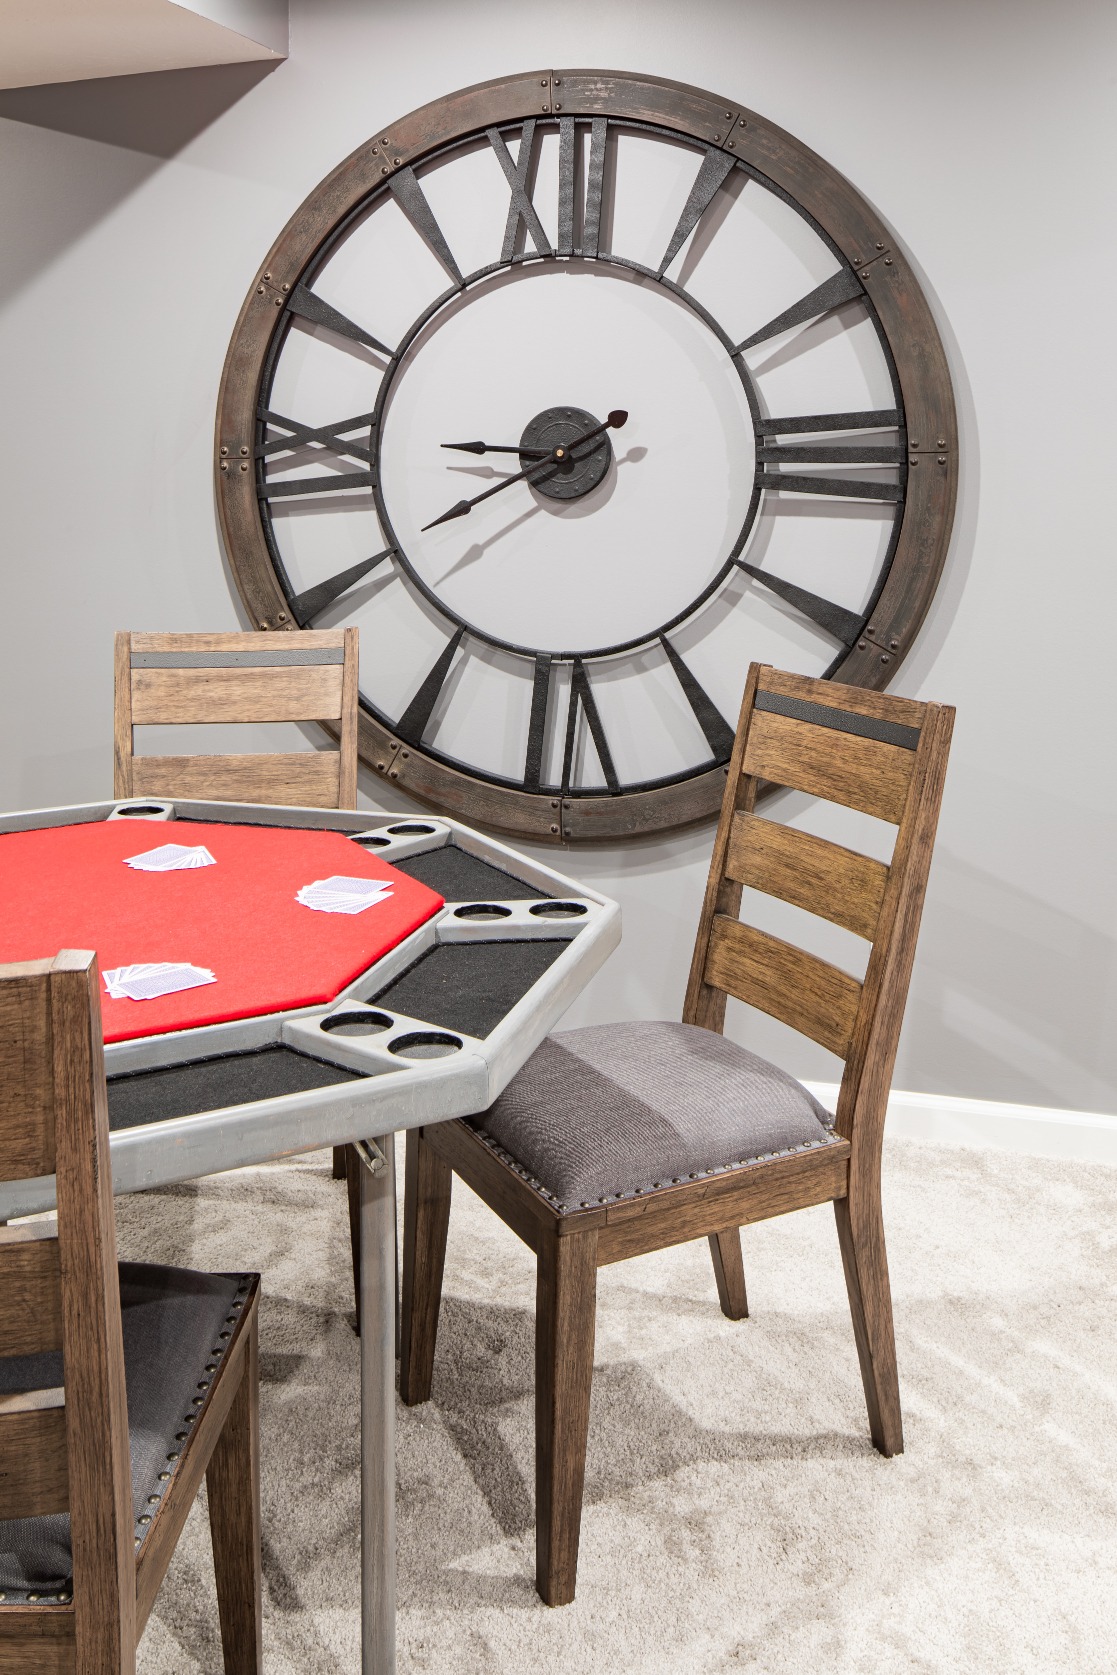 Poker table with chairs and a large wall clock